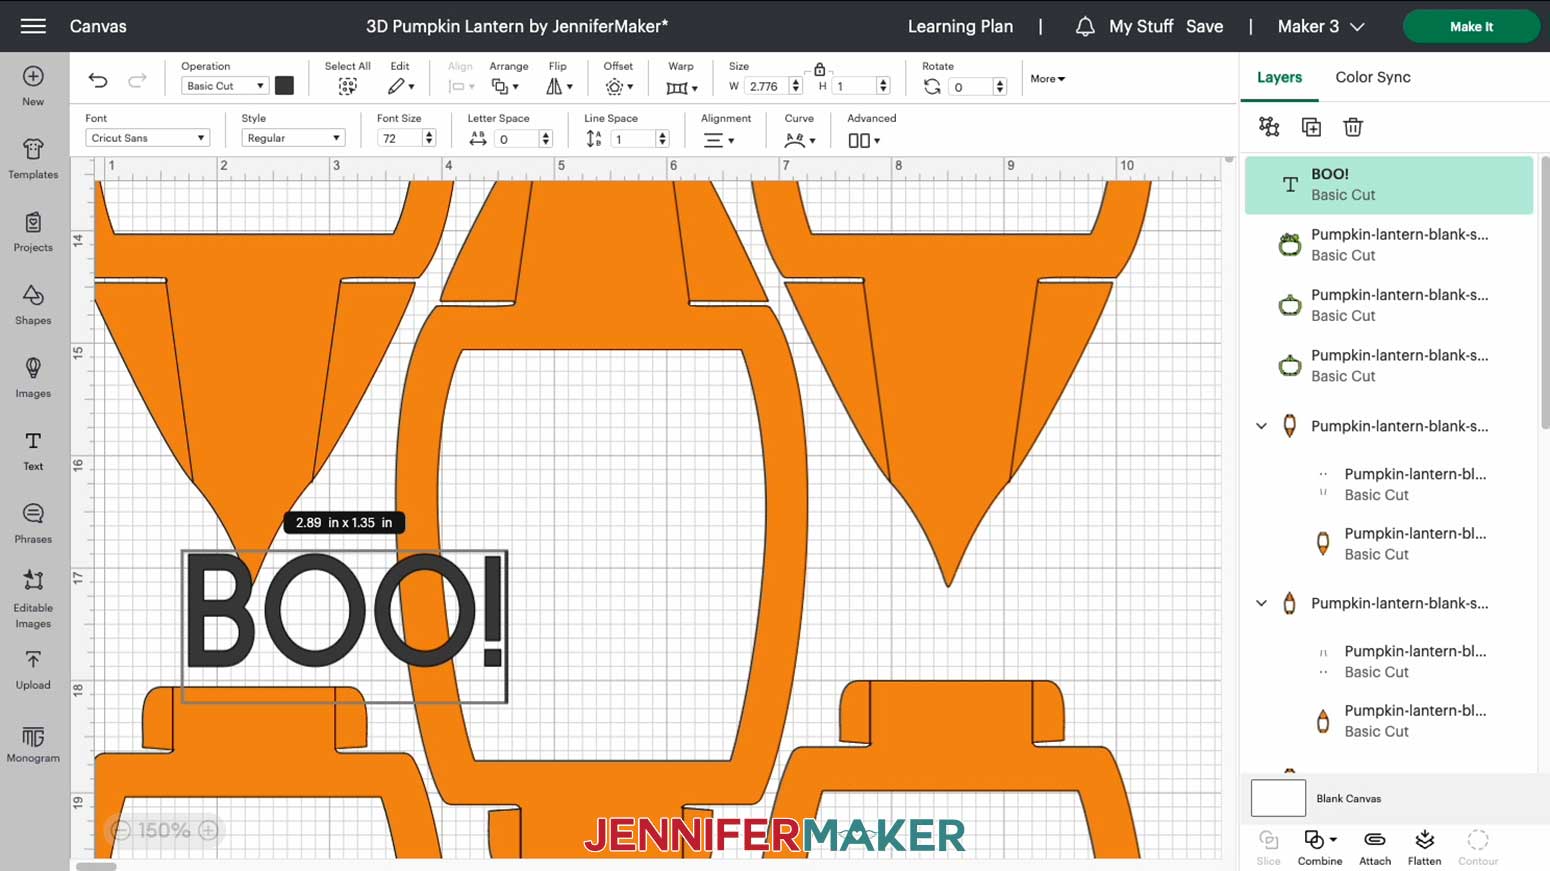 Type the word "boo!" in Cricut Design Space for a customized 3D pumpkin lantern panel